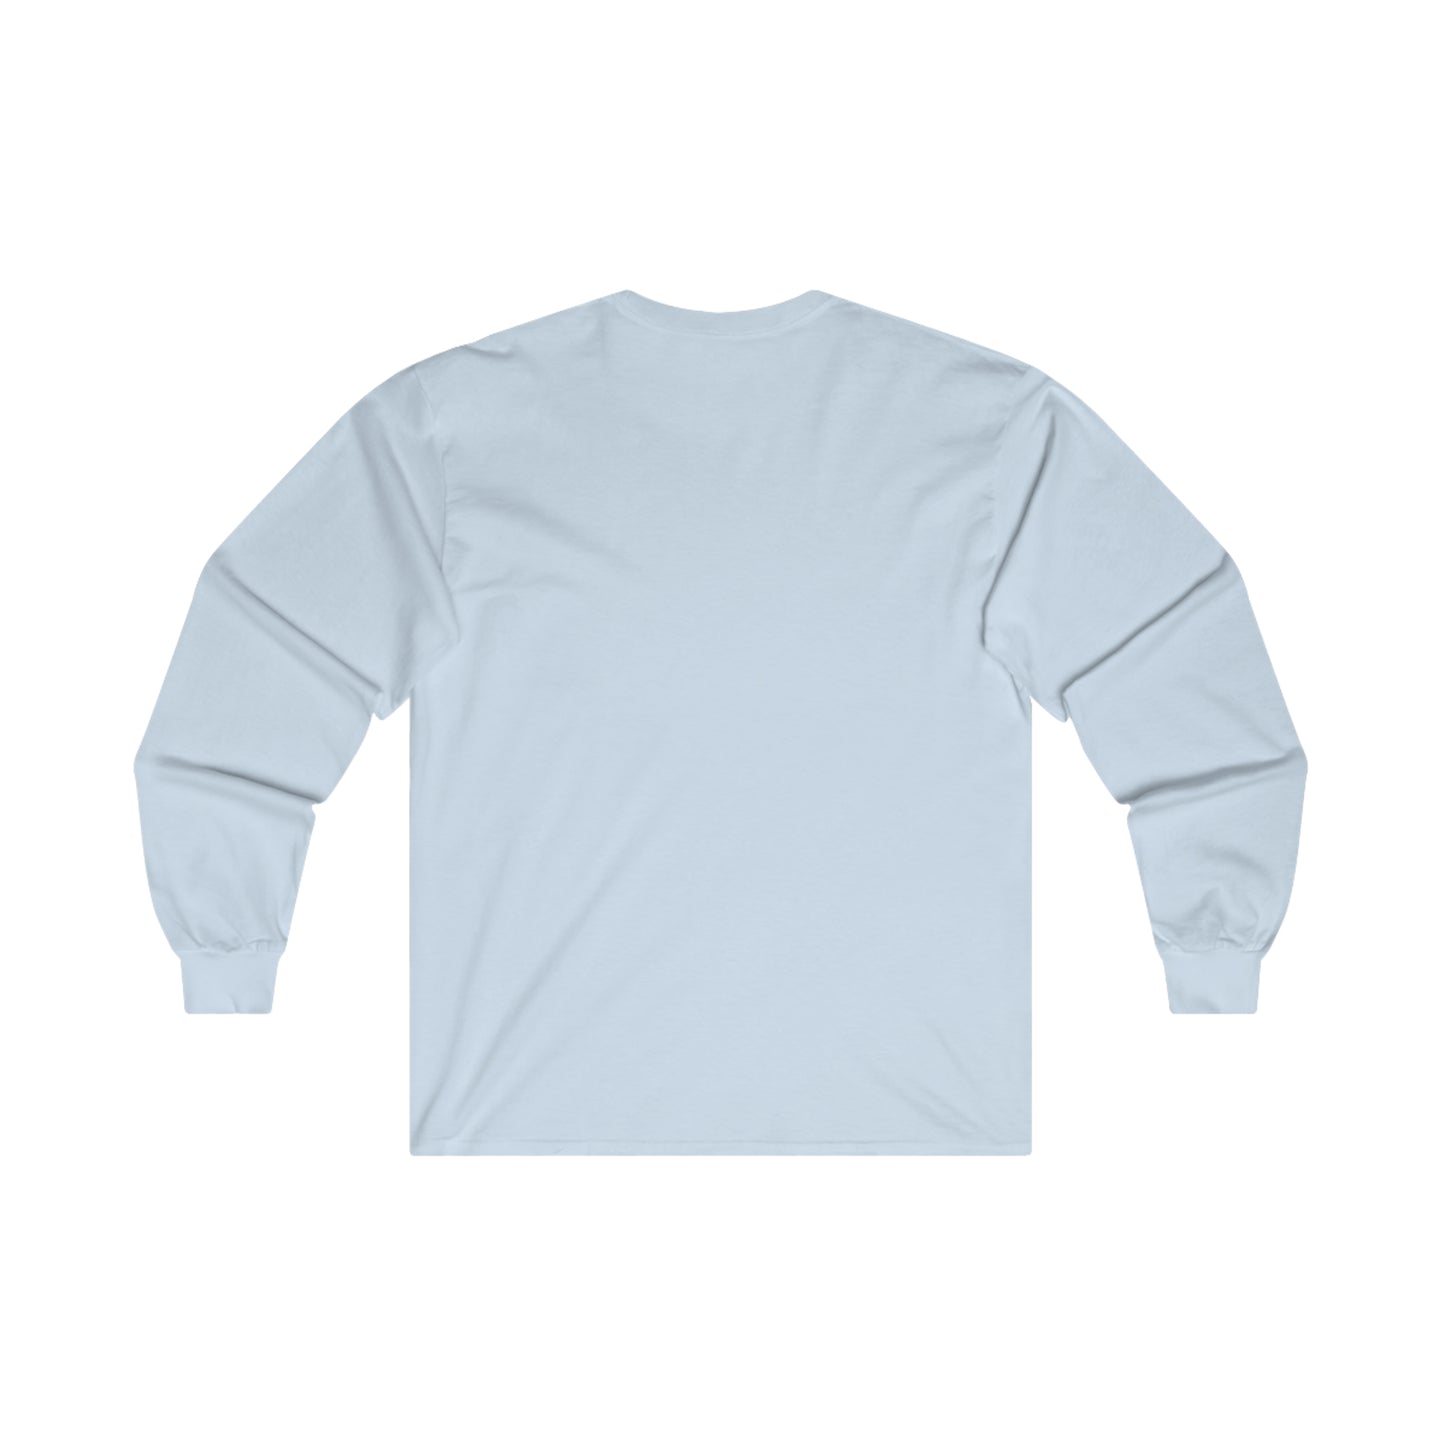 Gods Hand Passing Beer - Ultra Cotton Long Sleeve Tee